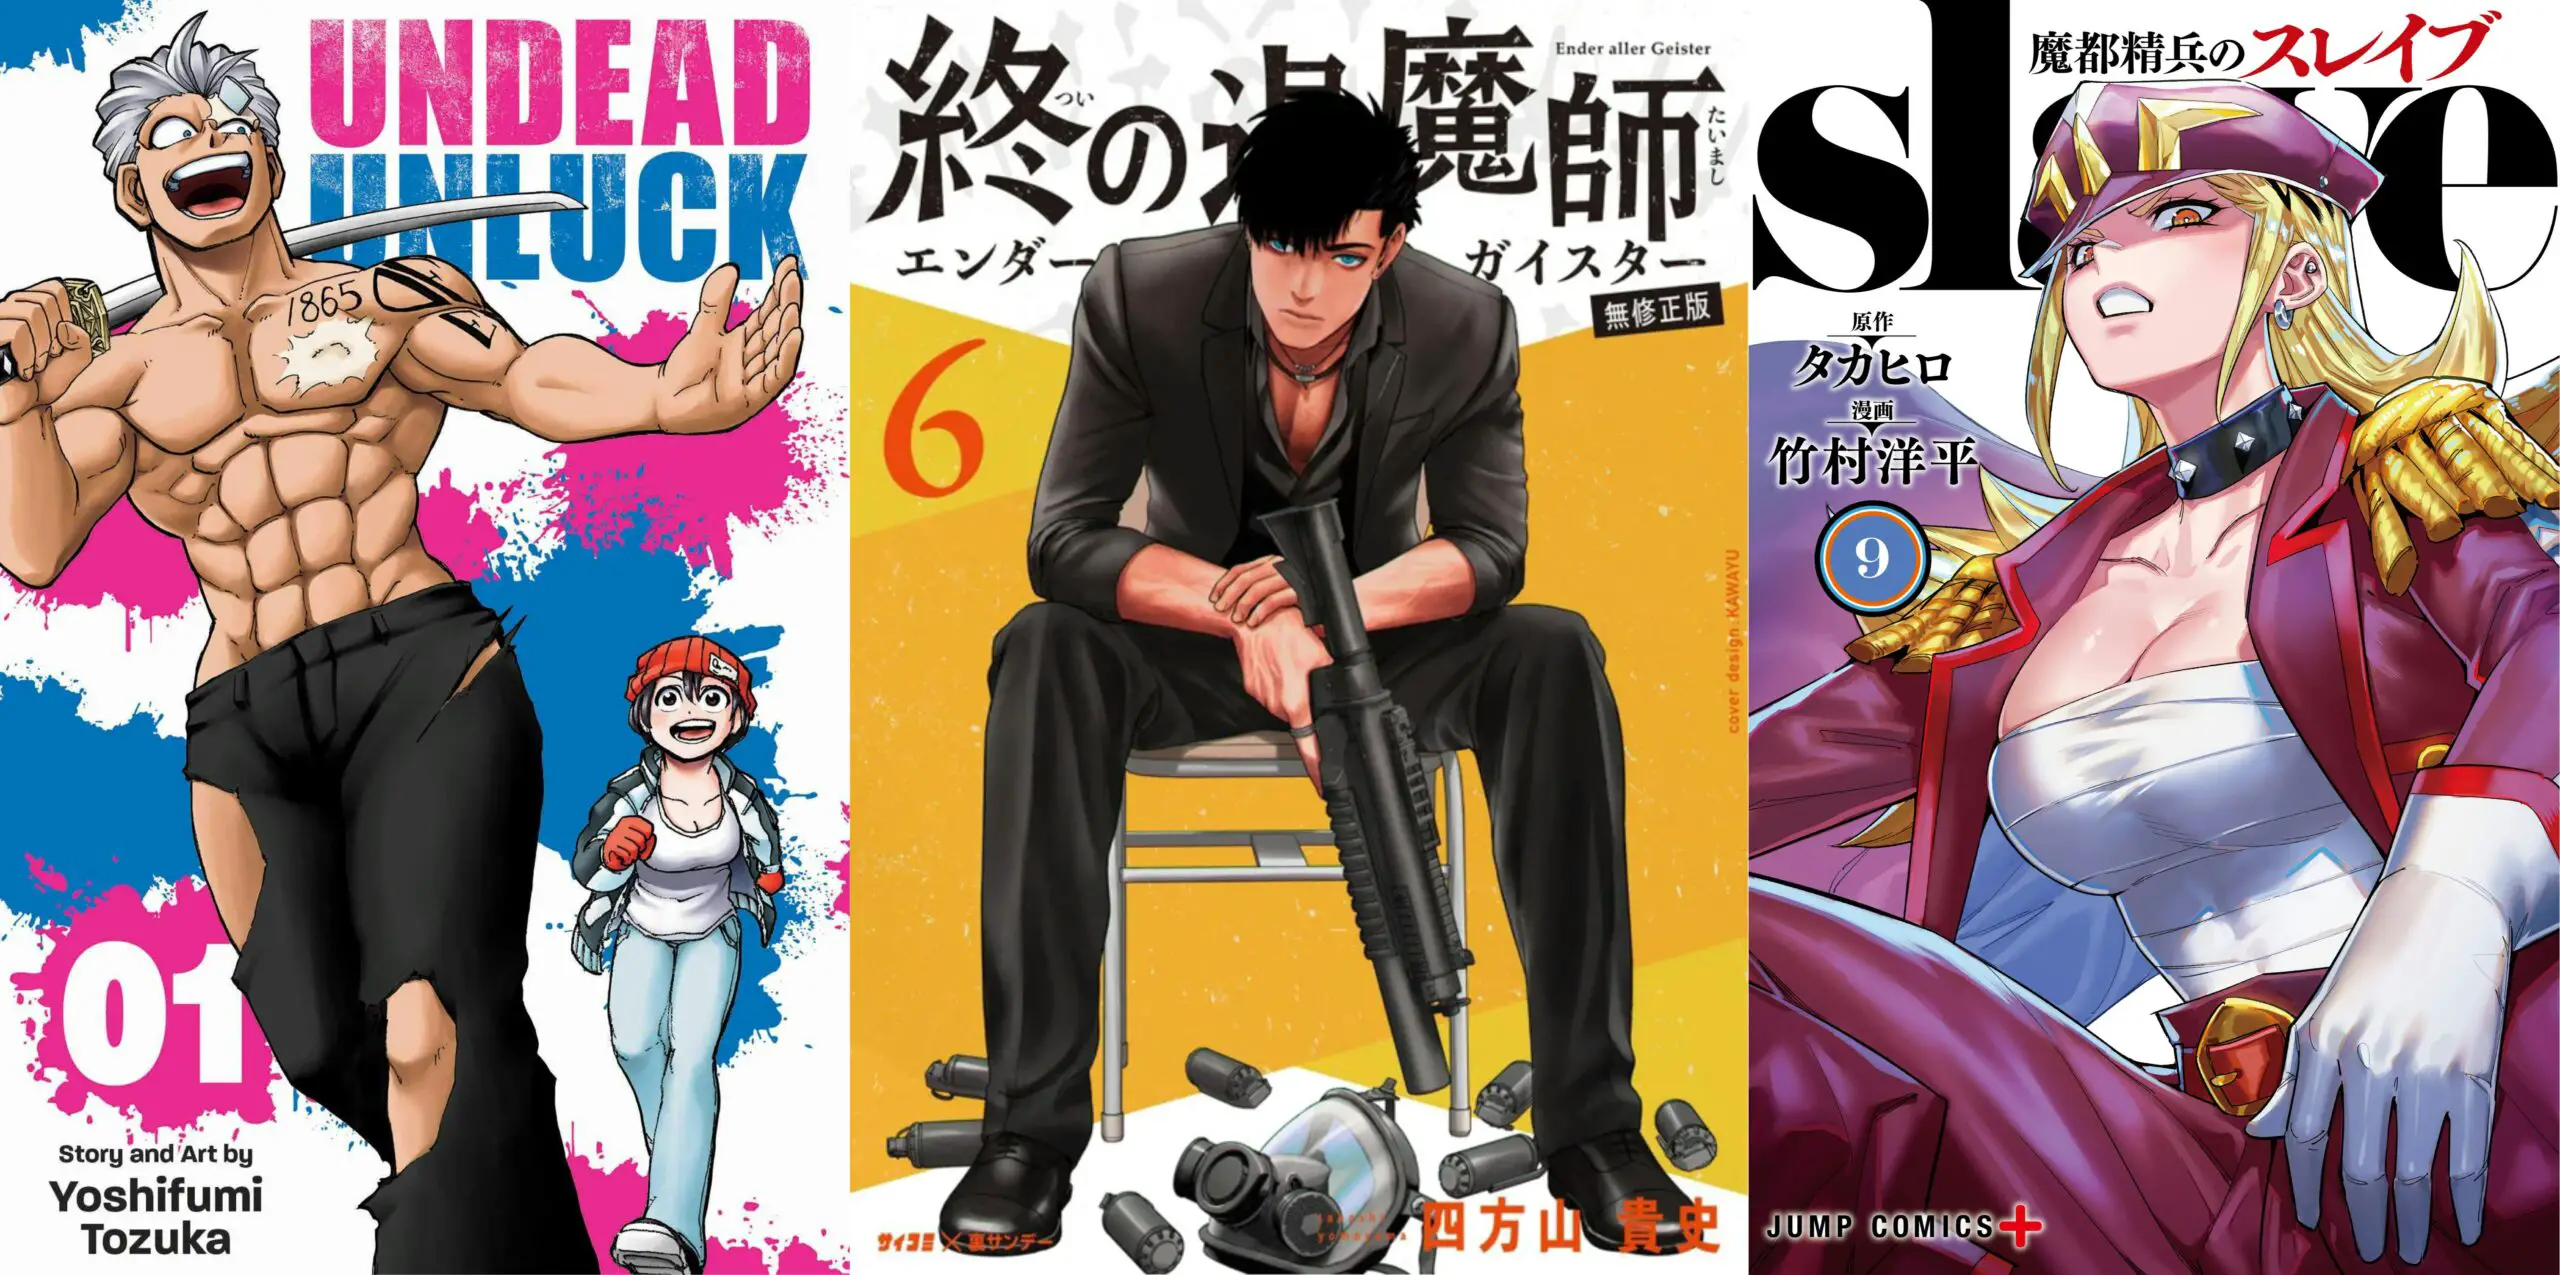 Top 10 Action Shounen Manga Recommendation For You